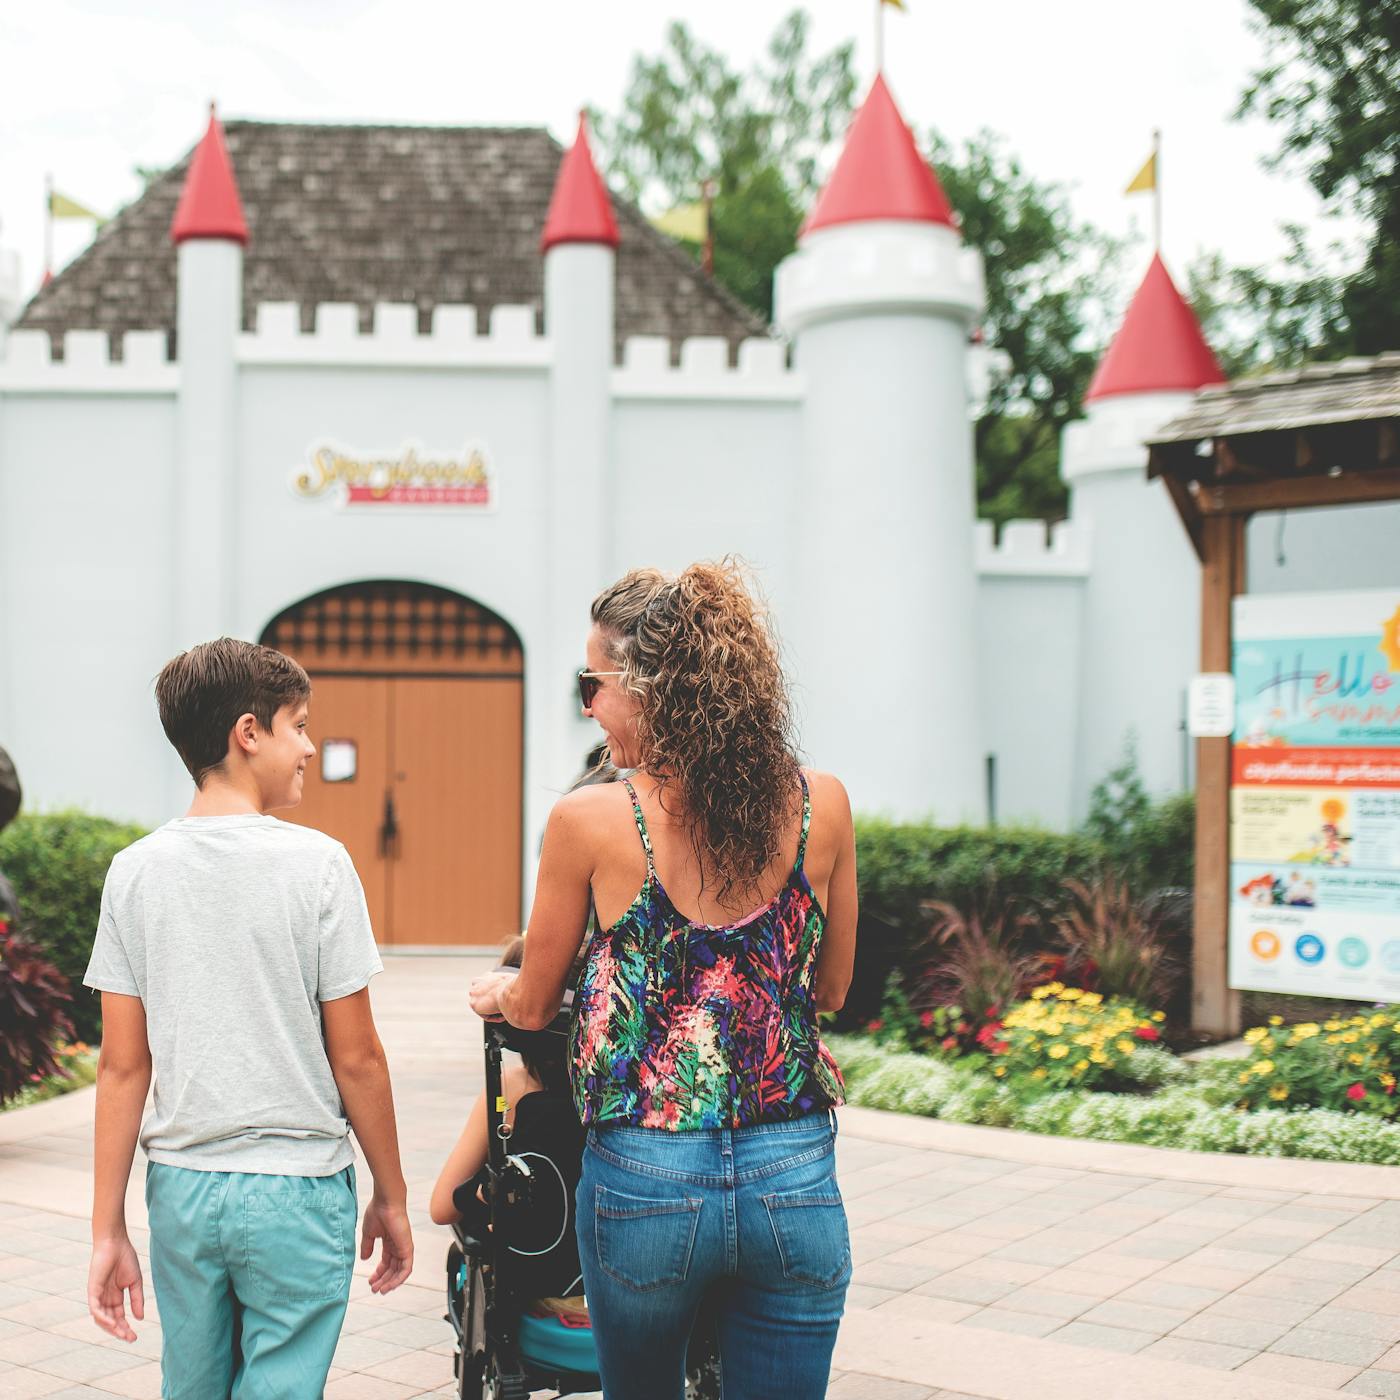 Mother and kids entering castle at Storybook Gardens in London, Ontario (photo by Dudek Photography))